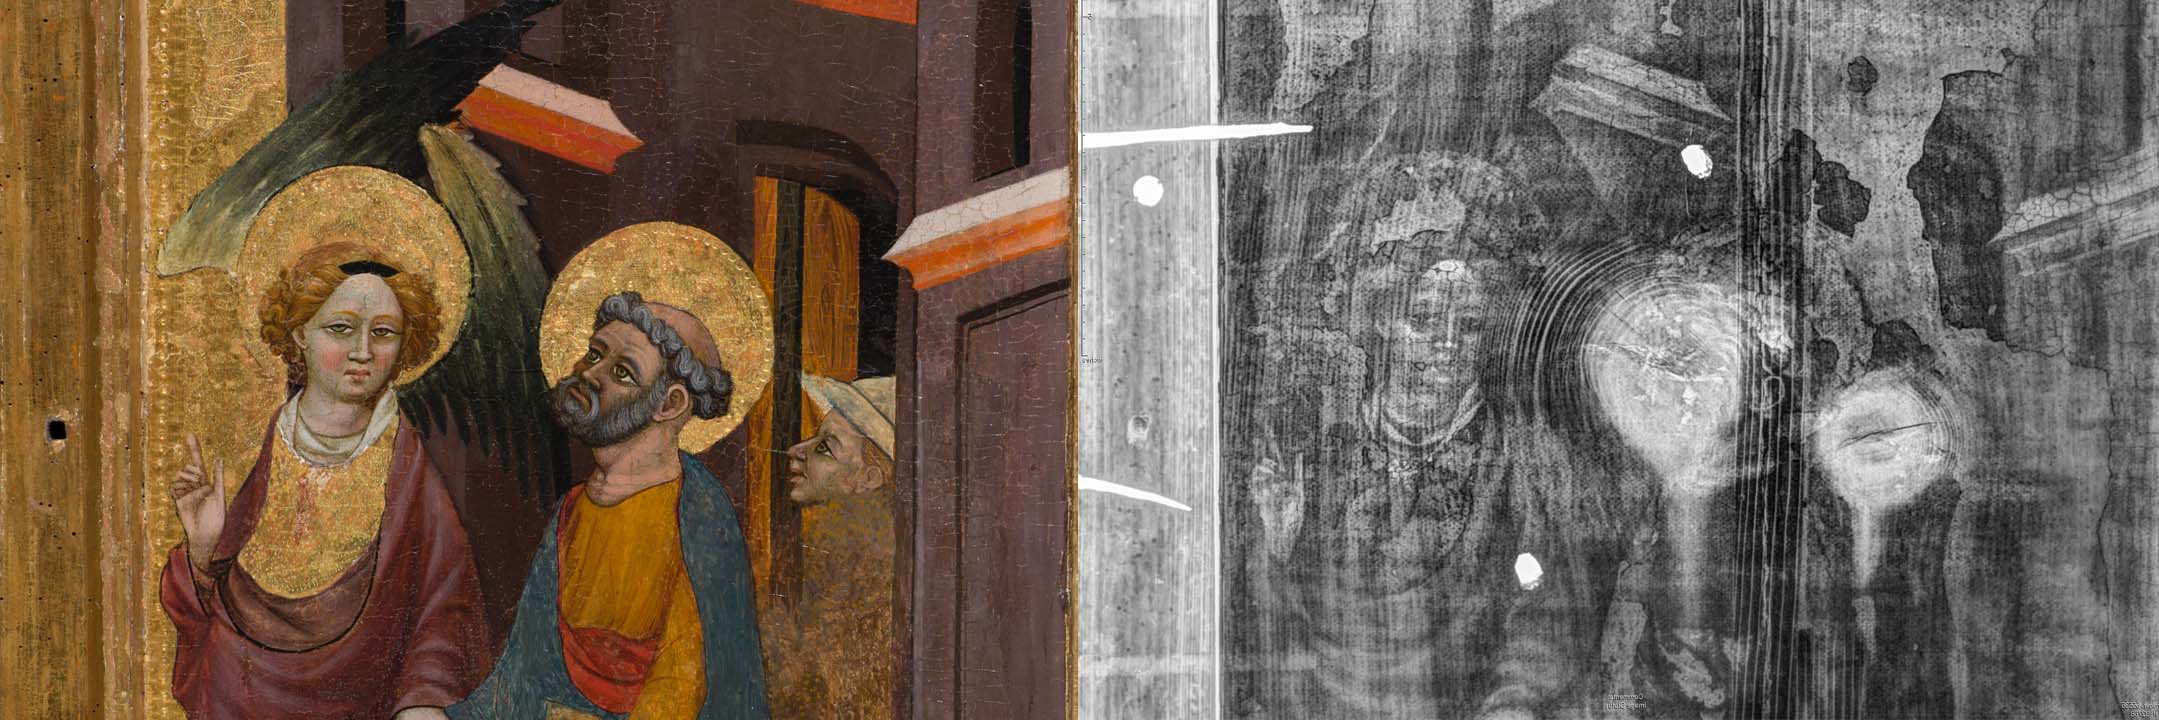 detail from Retablo of Saint Peter and x-ray